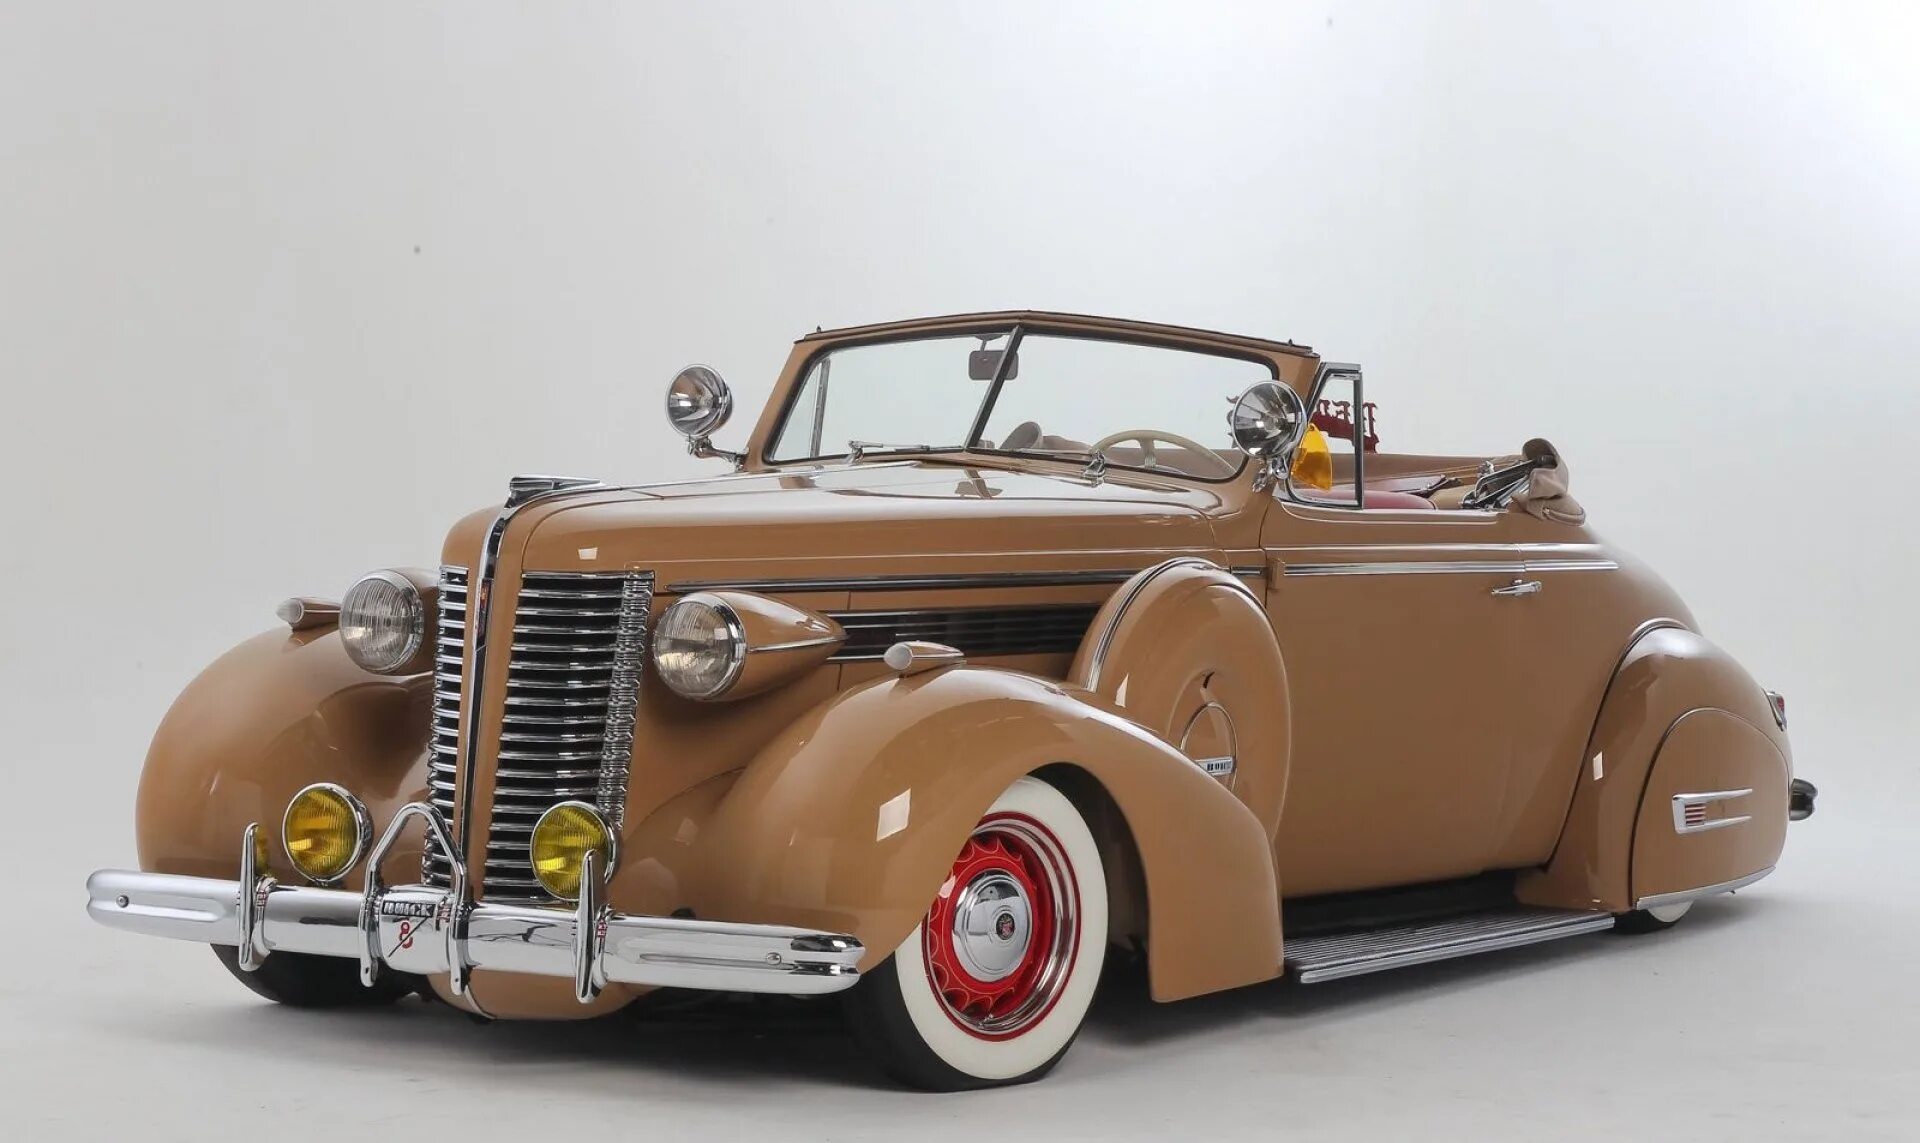 Brown car. Buick 1938. Buick 1938 Automatic. Buick Roadmaster 1938. Buick 40 1938.